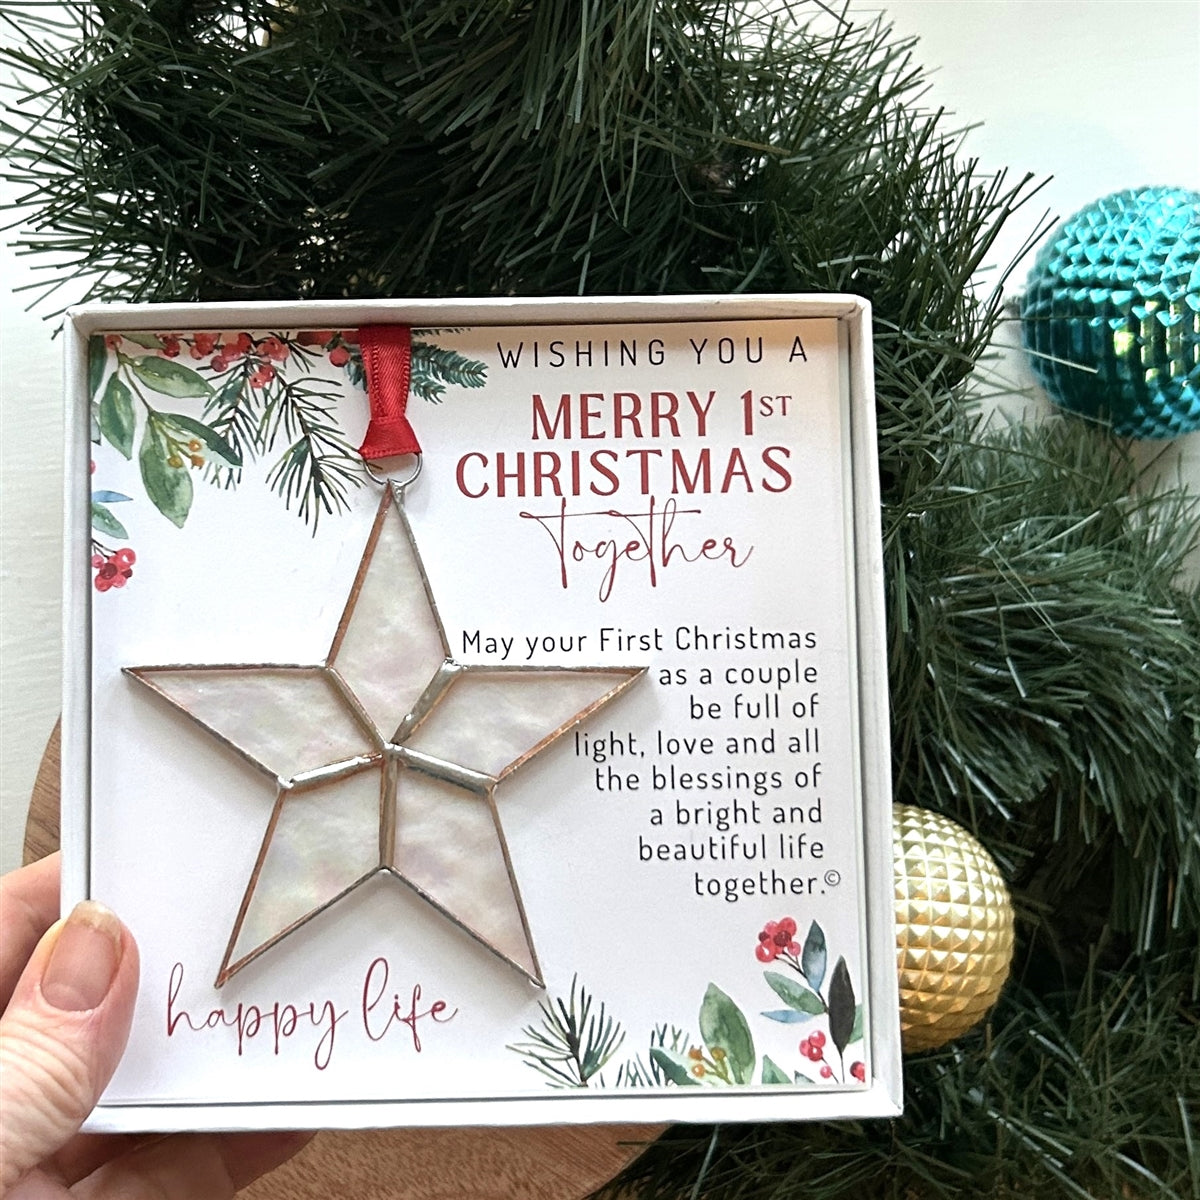 First Christmas Together star ornament boxed in Christmas setting